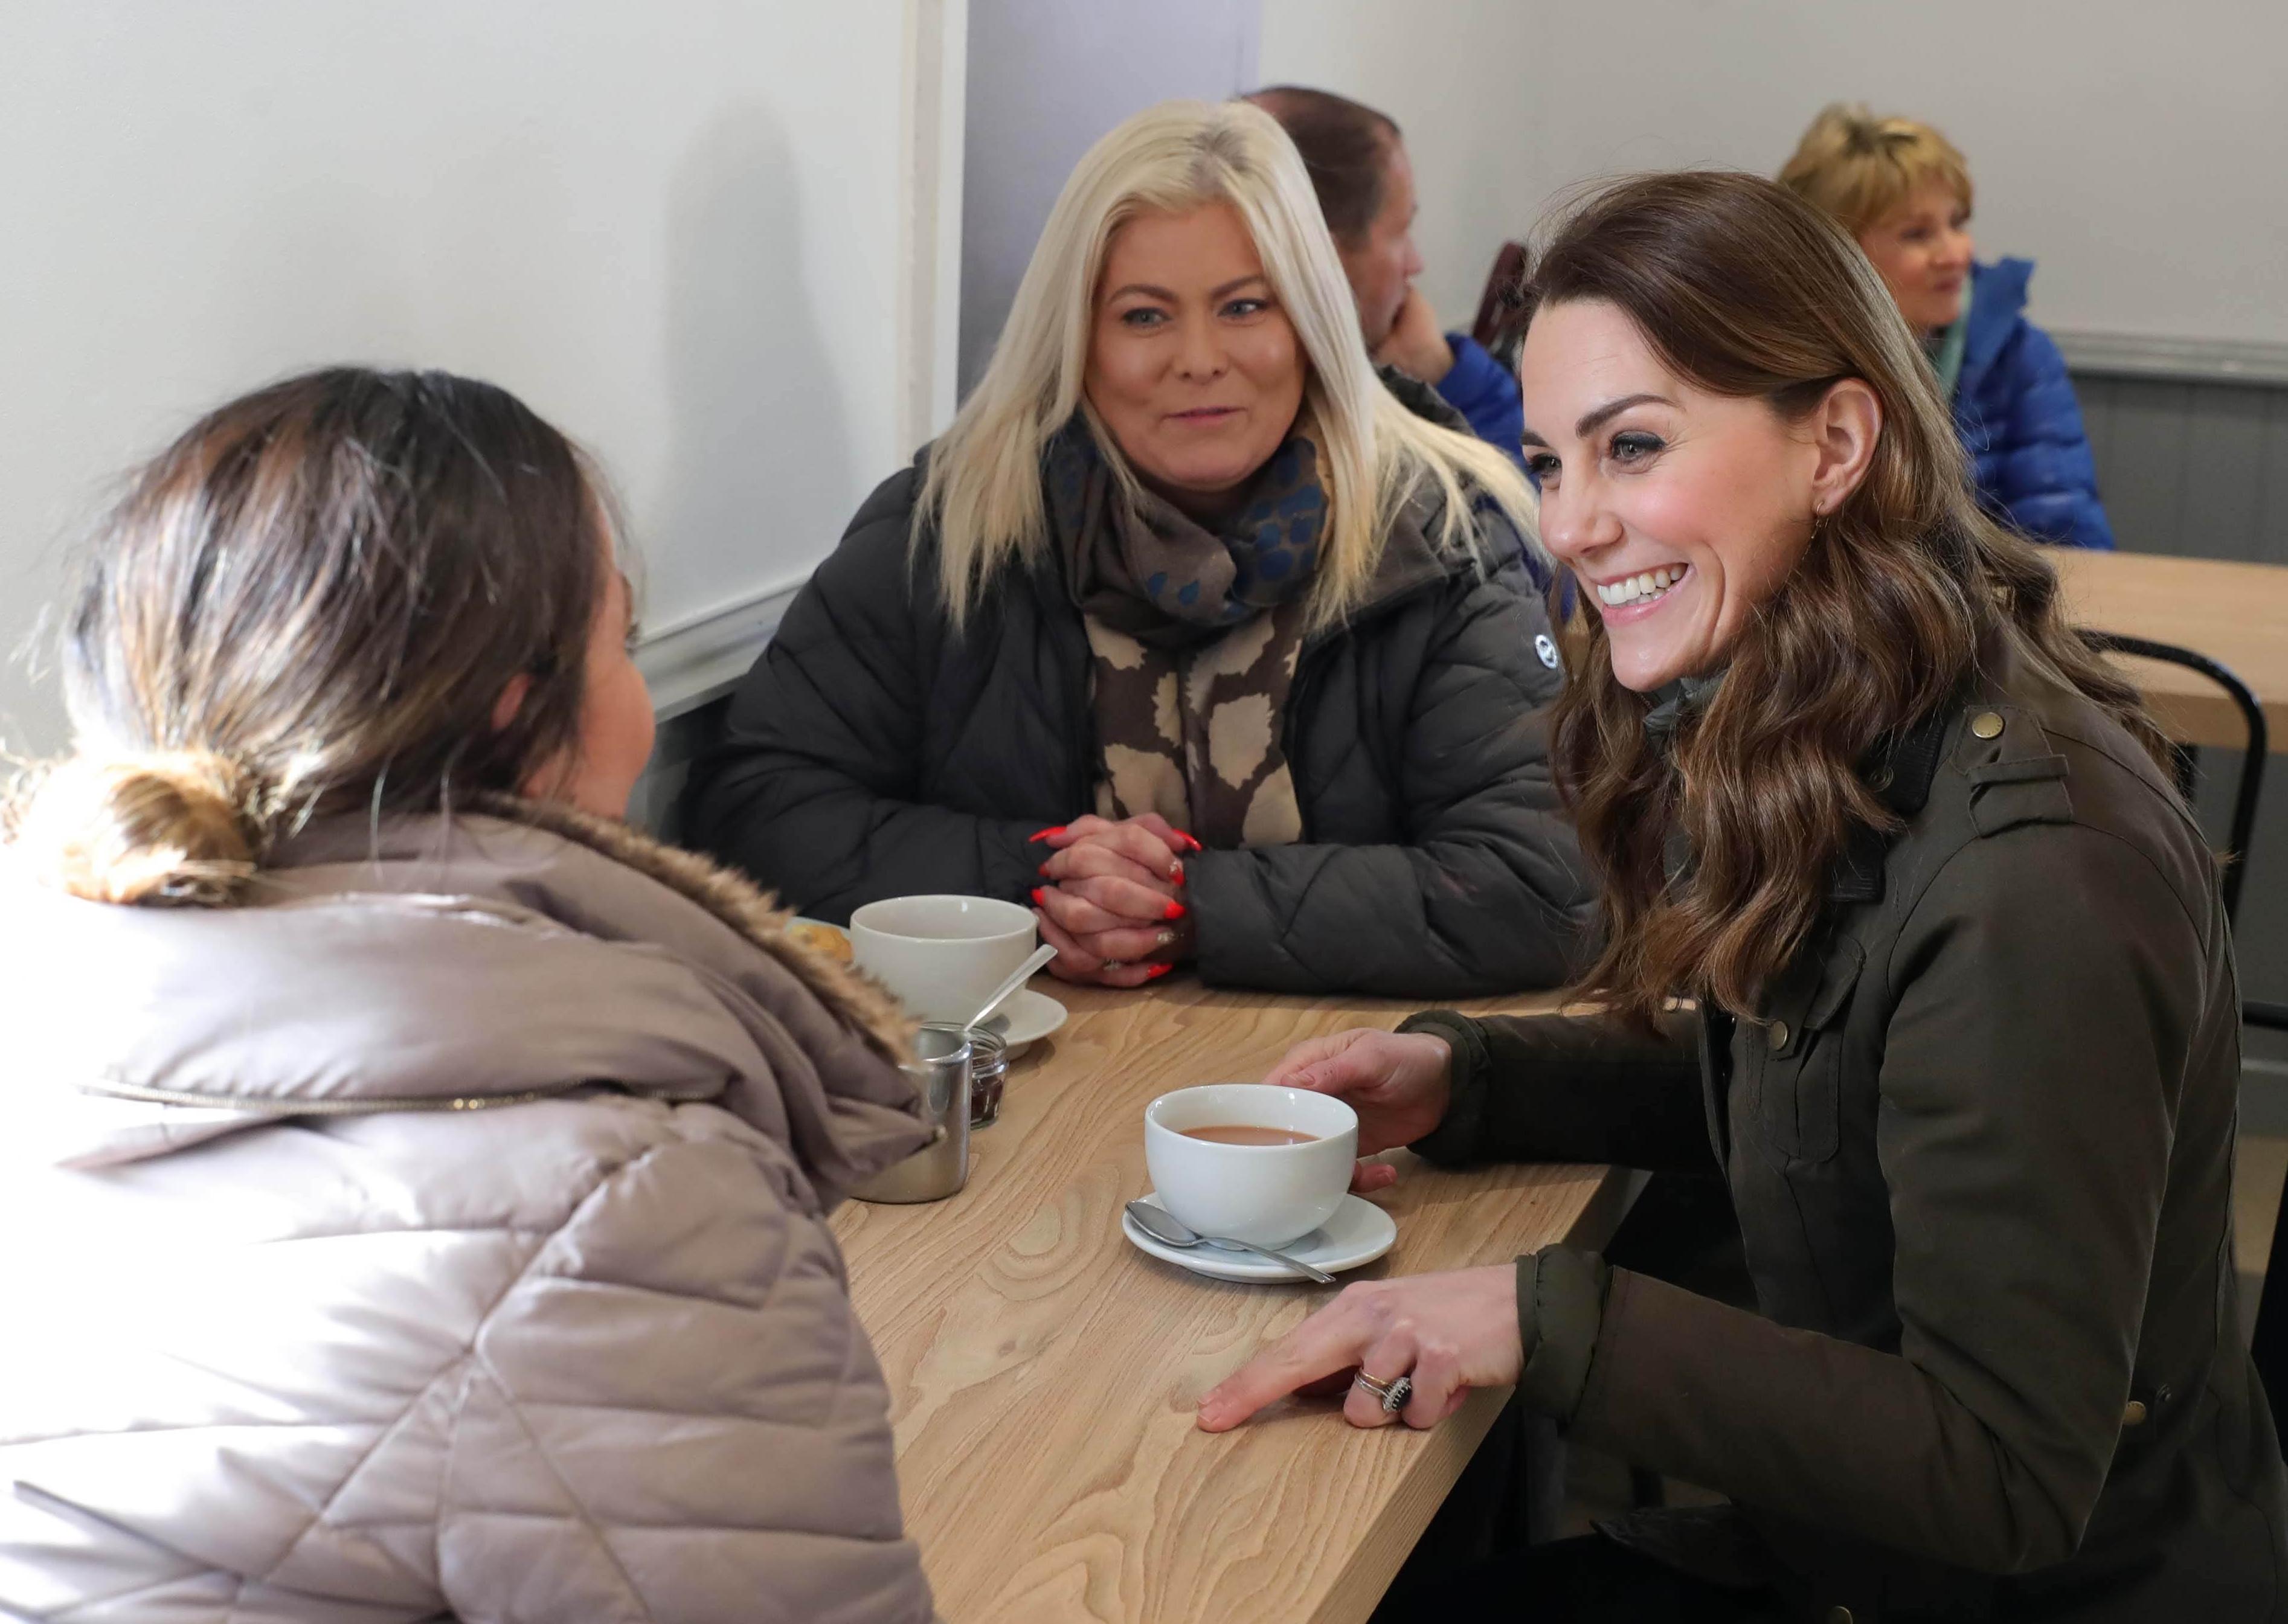 HRH The Duchess of Cambridge pictured at The Ark Open Farm in Newtownards